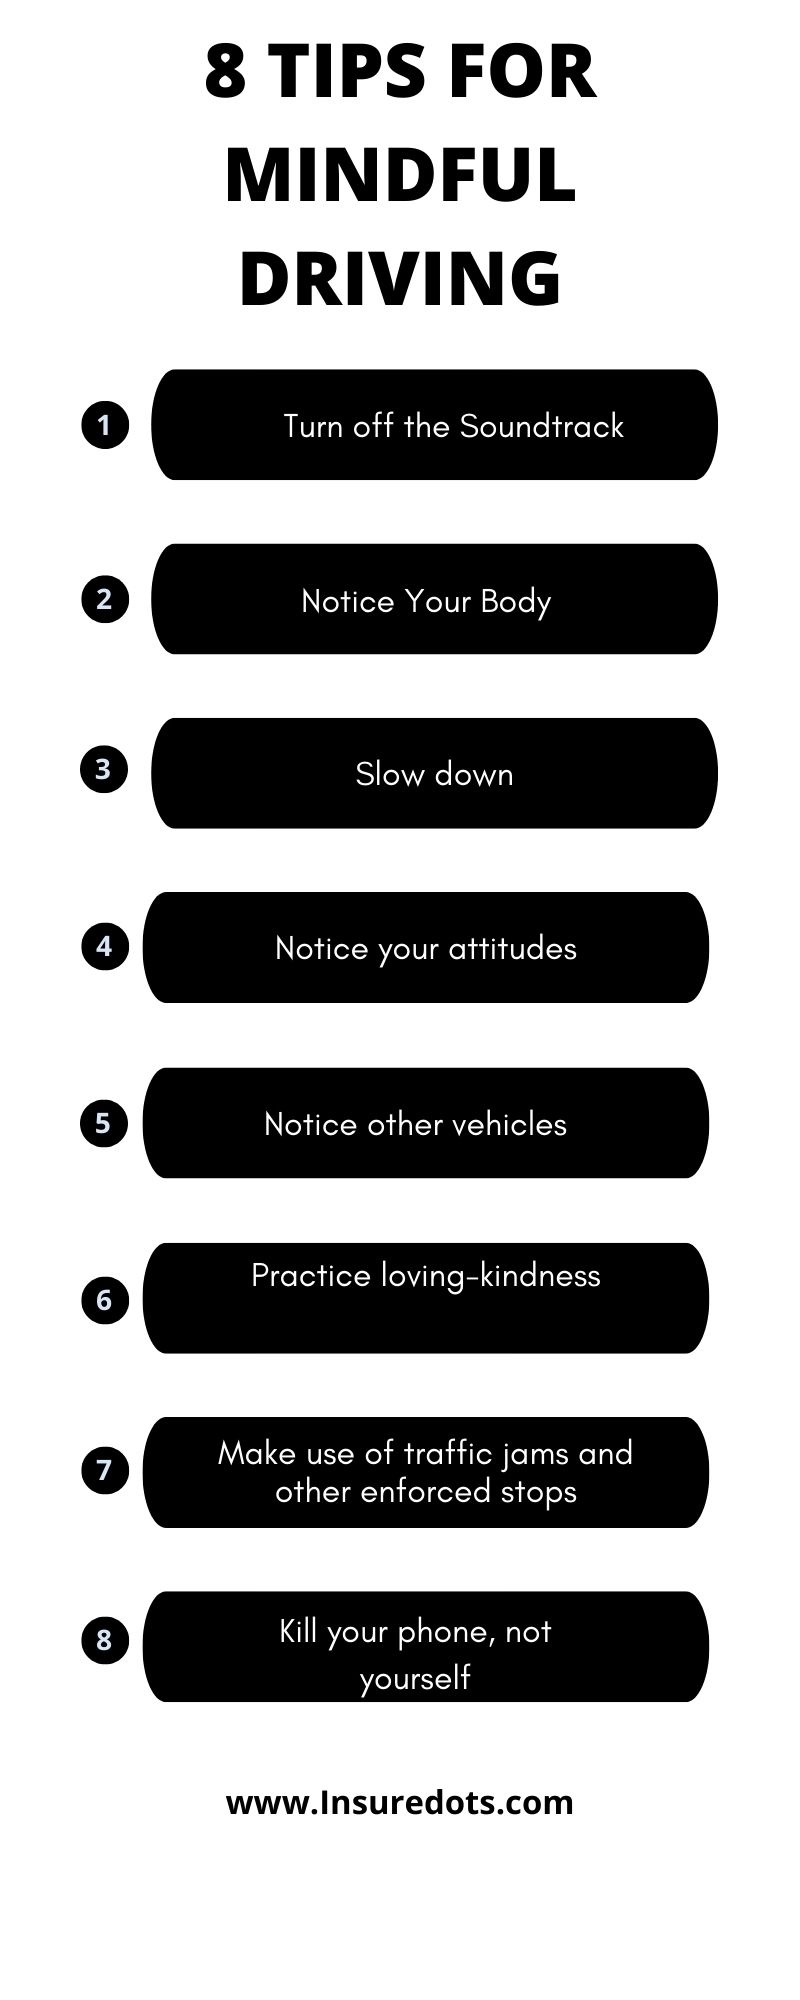 8 tips for mindful driving